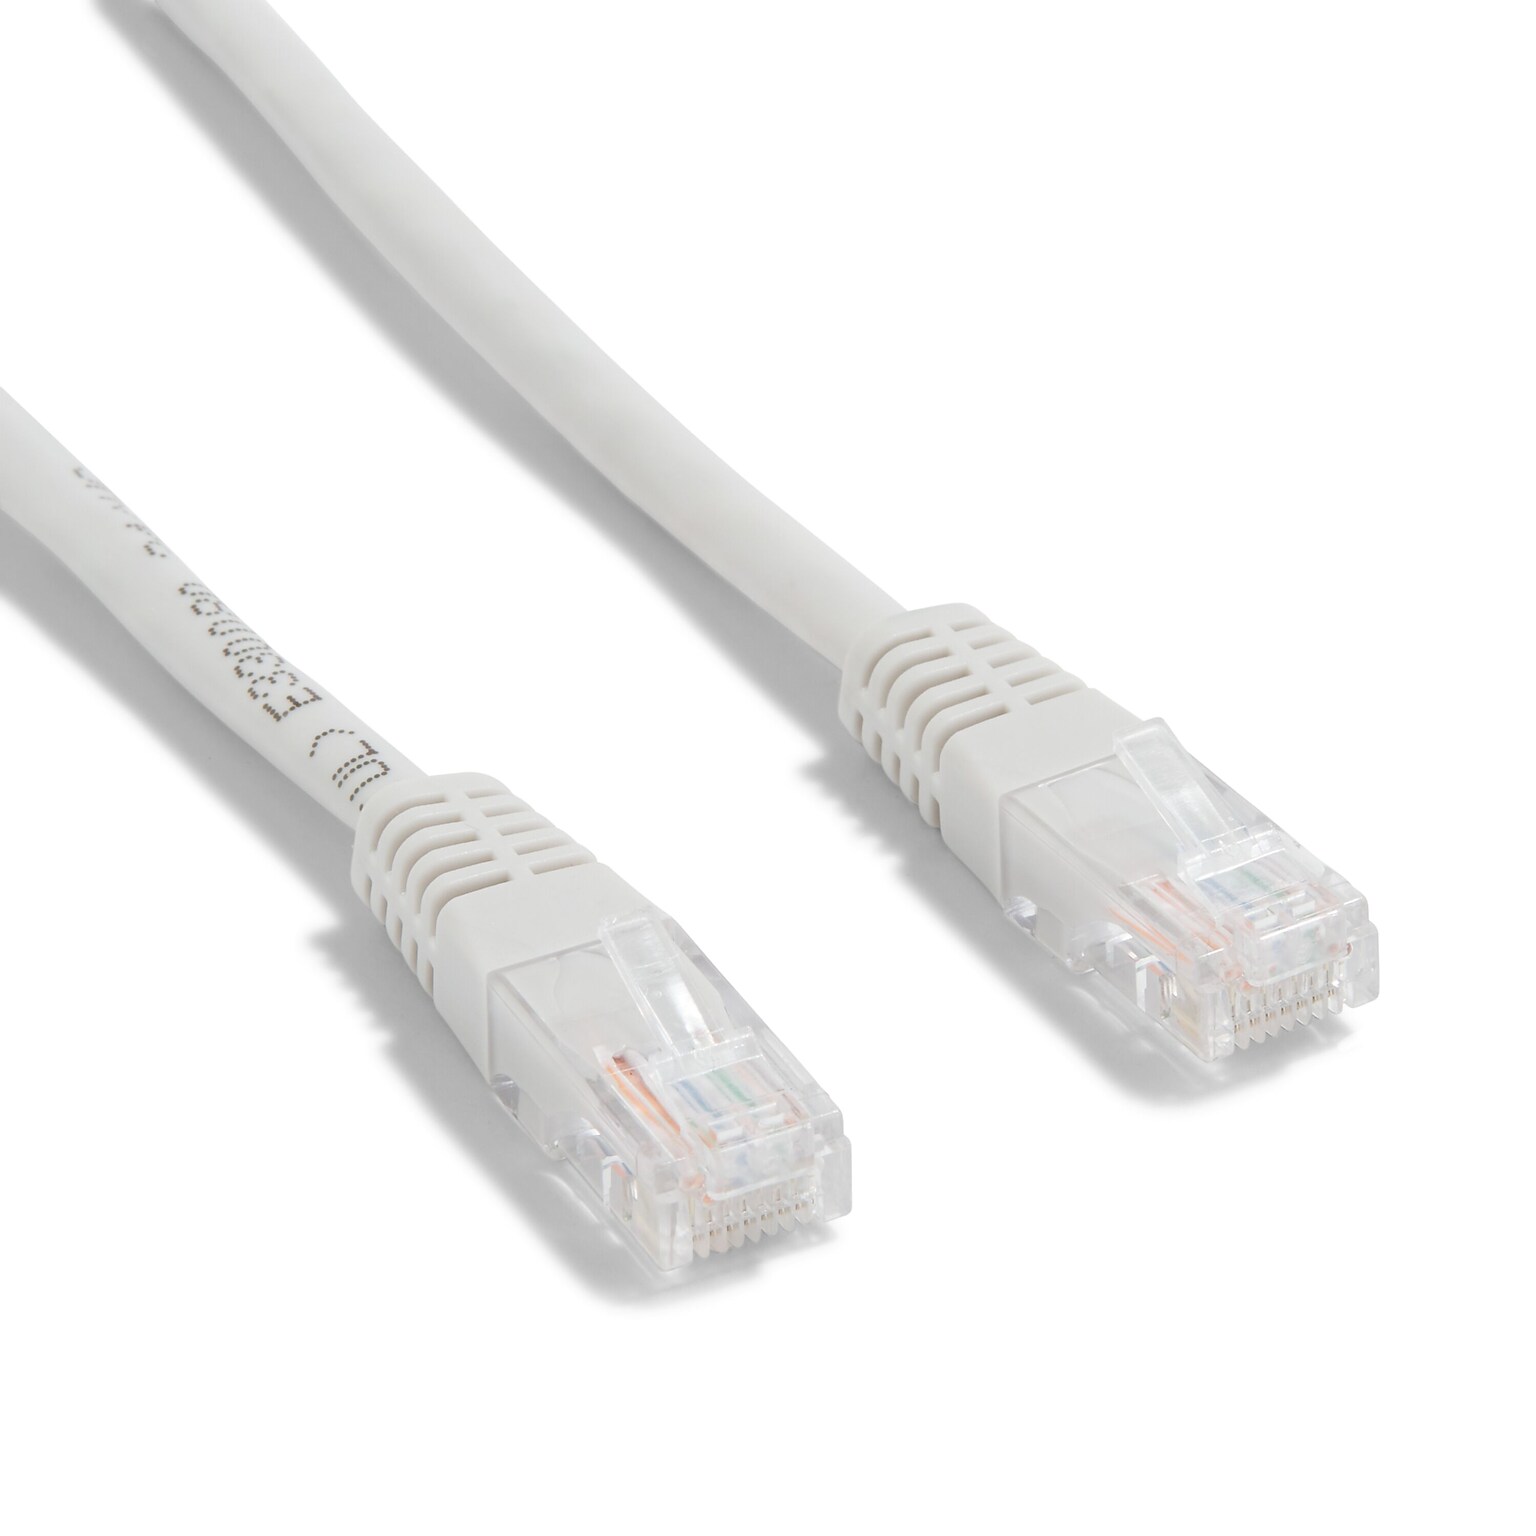 NXT Technologies™ NX56839 14 CAT-6 Cable, Gray